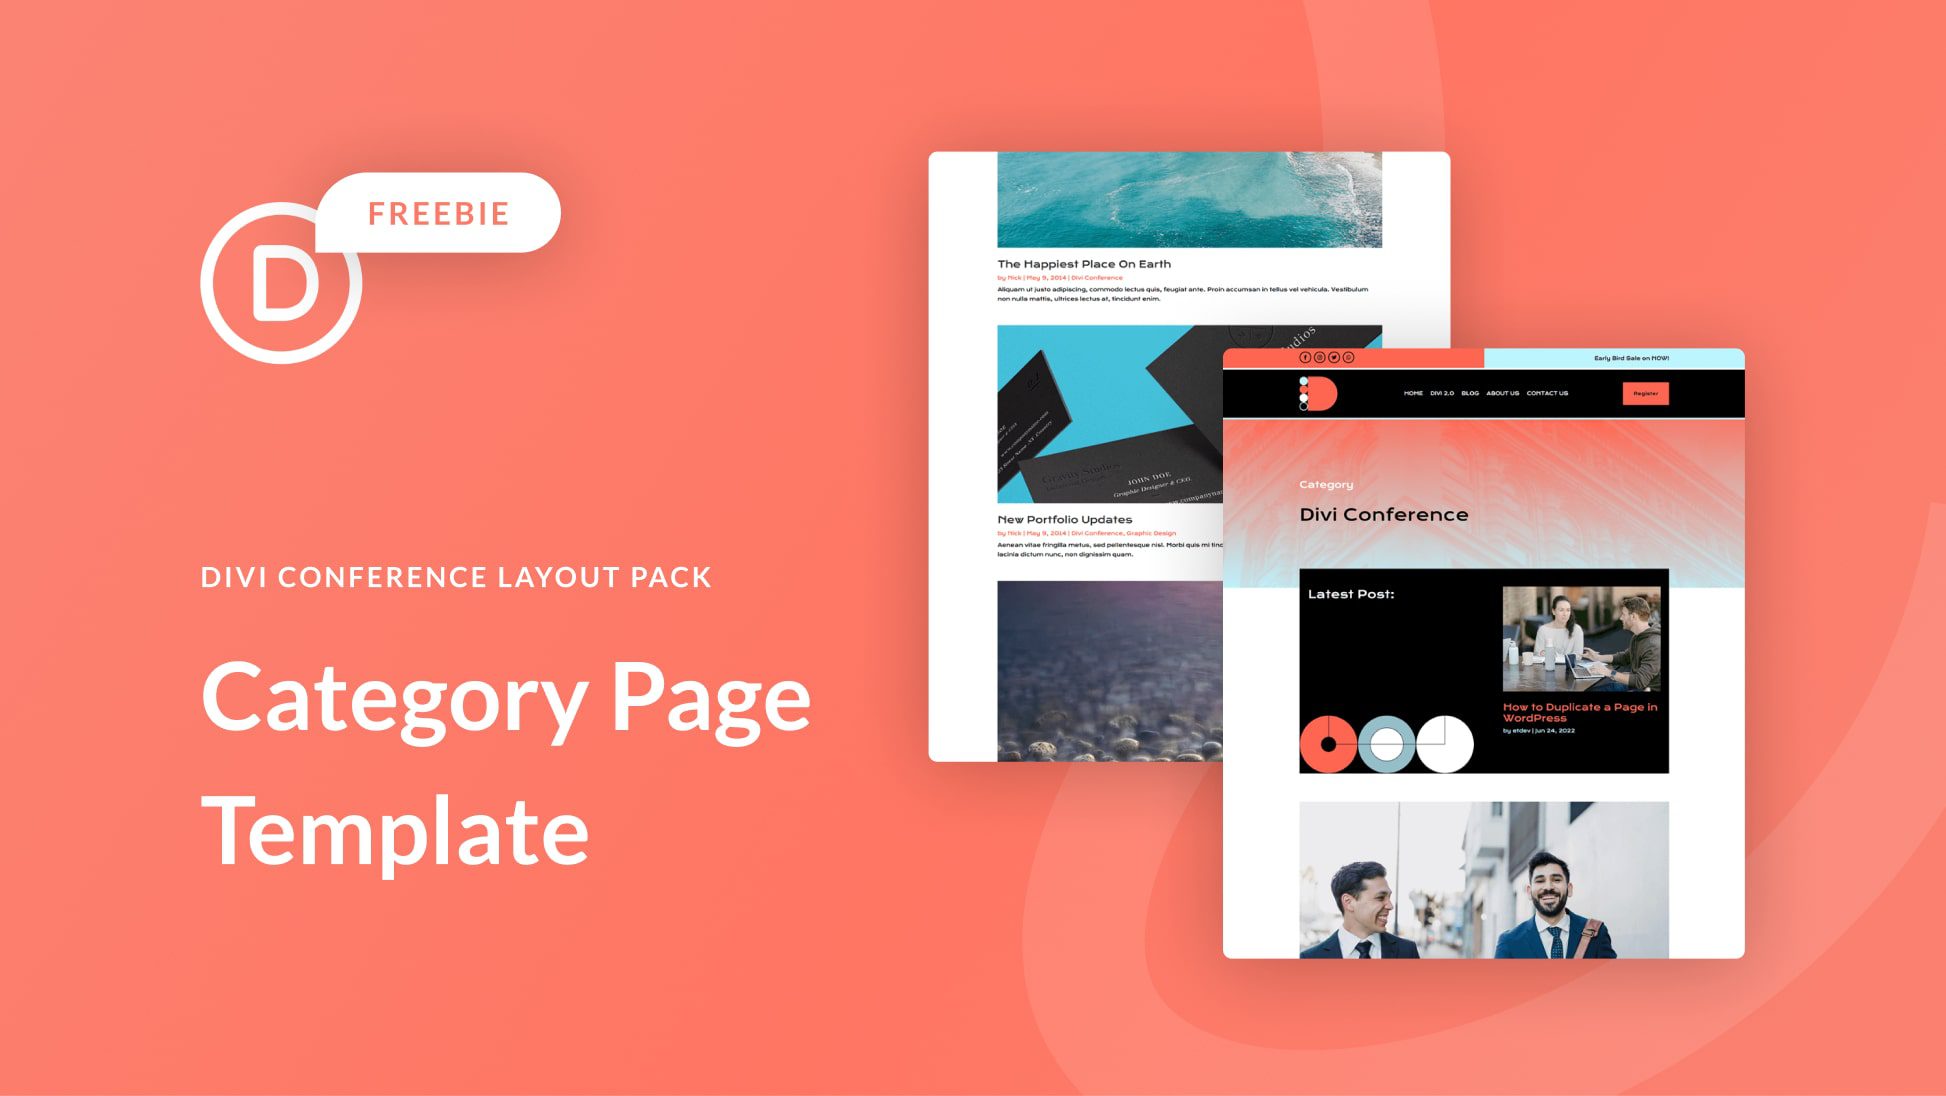 Download a FREE Category Page Template for Divi’s Conference Layout Pack